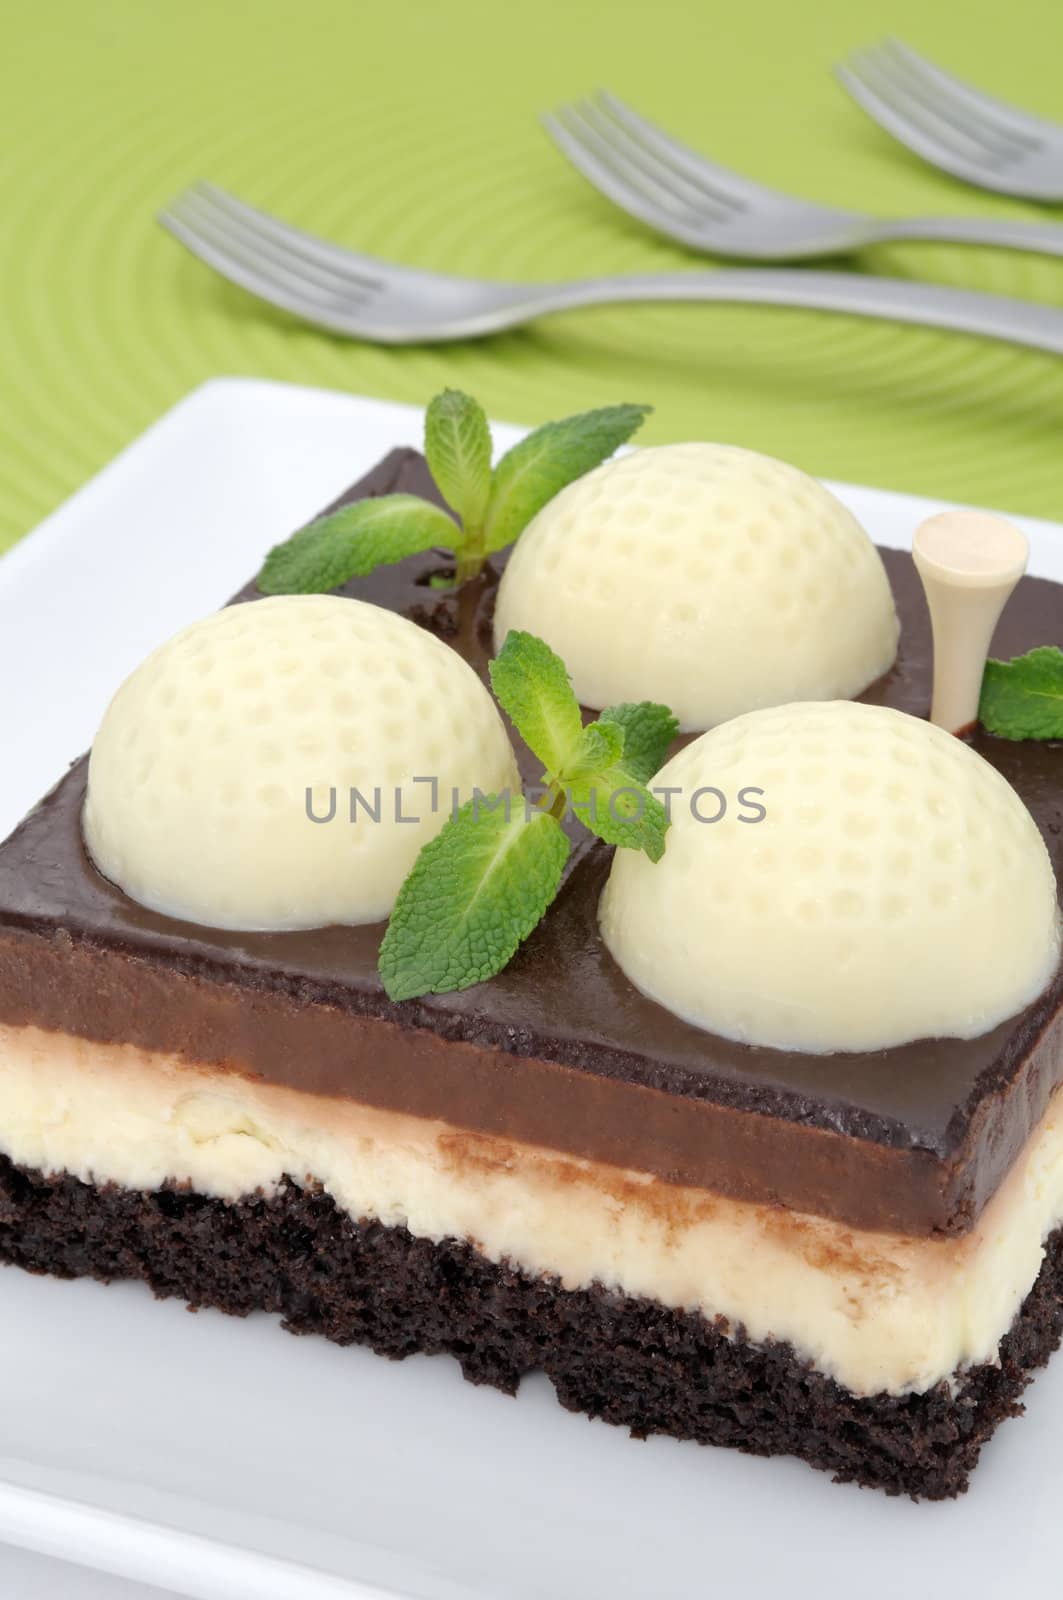 Fanciful chocolate golf cake with mint leaves on a green mat with forks